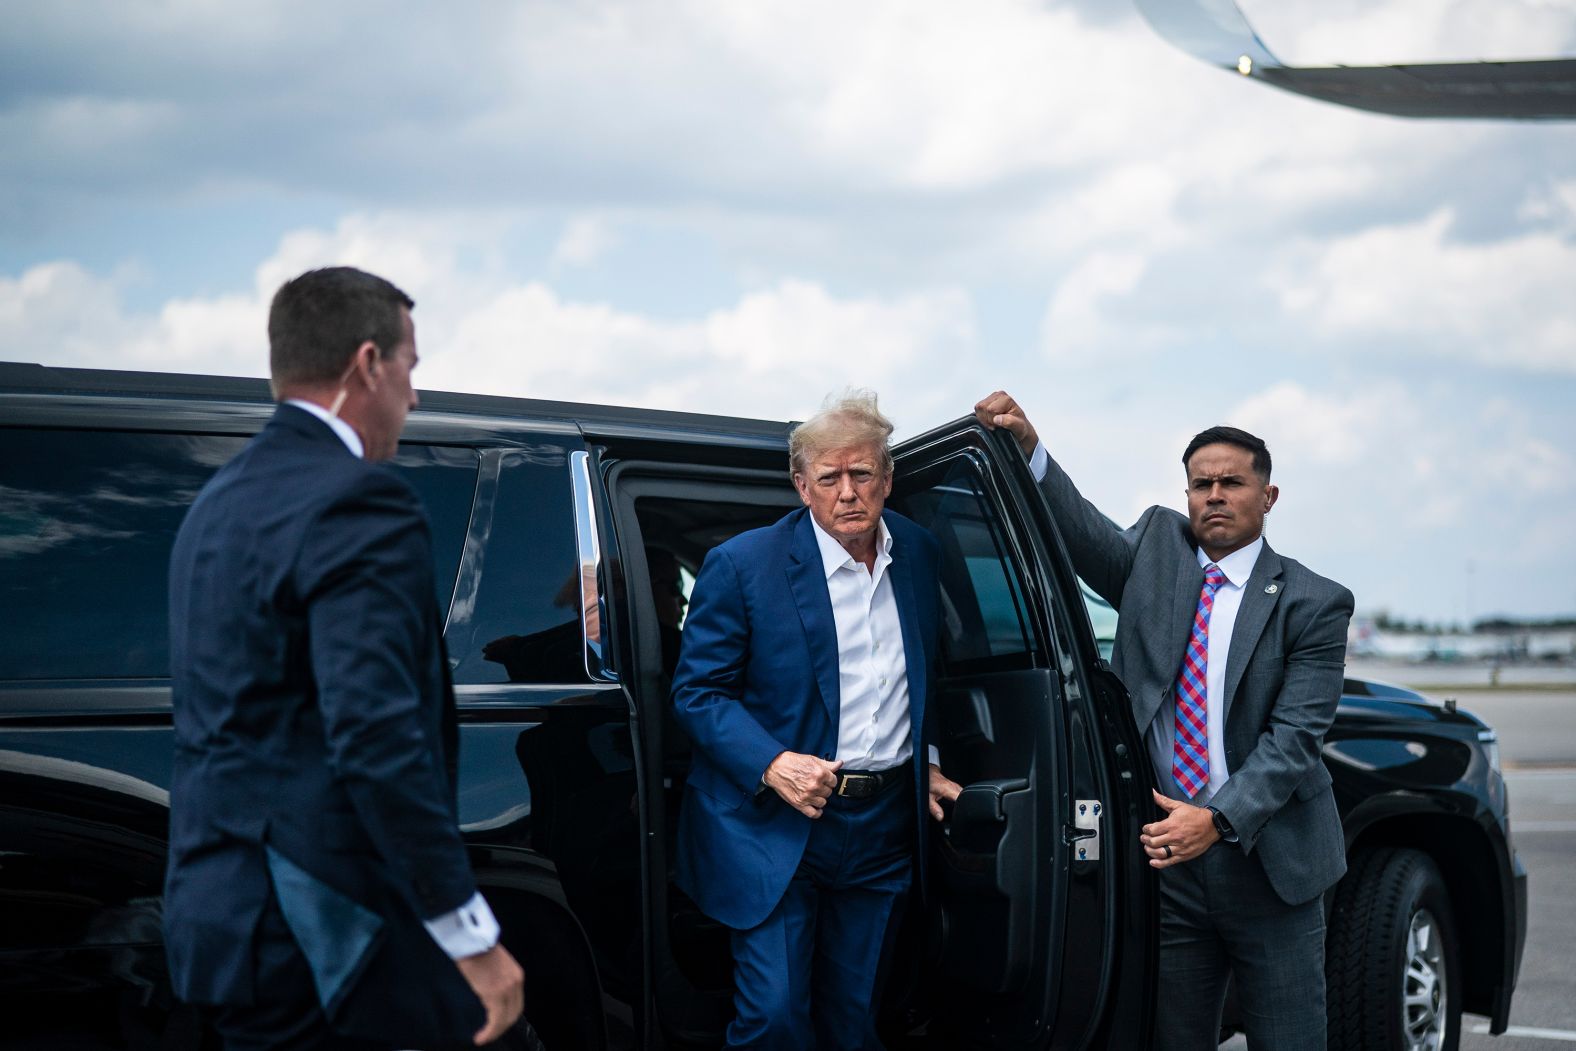 Trump boards his airplane before flying to Iowa to campaign on March 13.